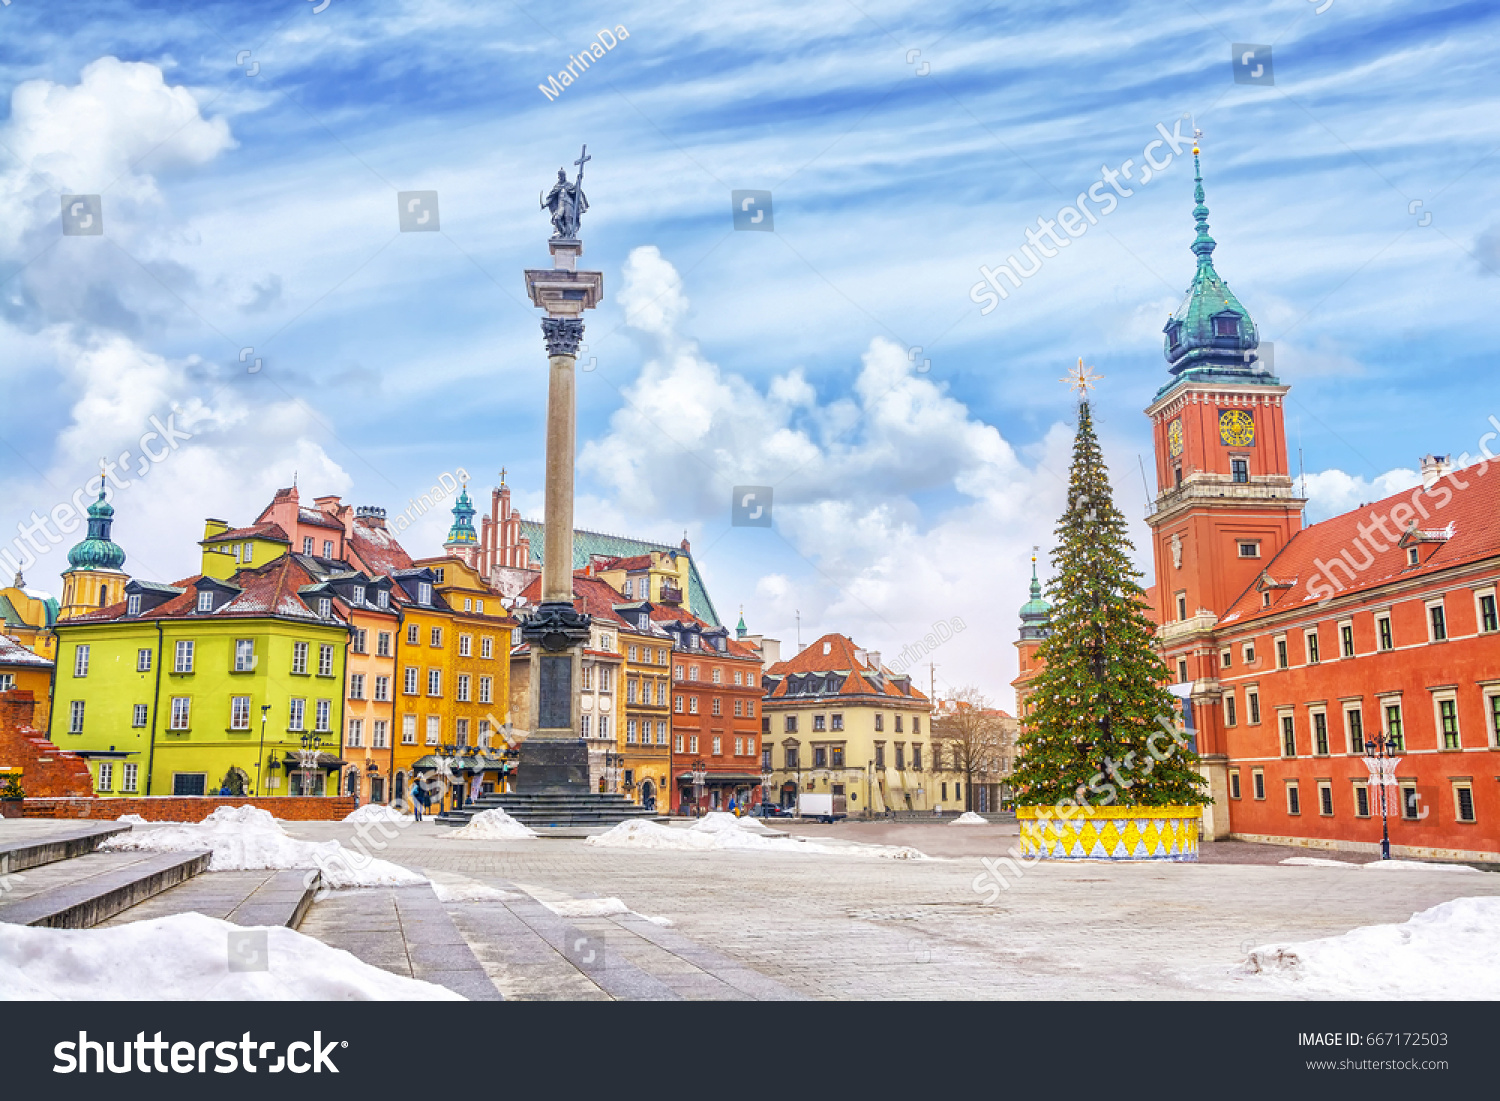 Royal Castle, ancient colorful townhouses and Sigismund's Column in Old town in Warsaw on a Christmas day, Poland, is UNESCO World Heritage Site. #667172503